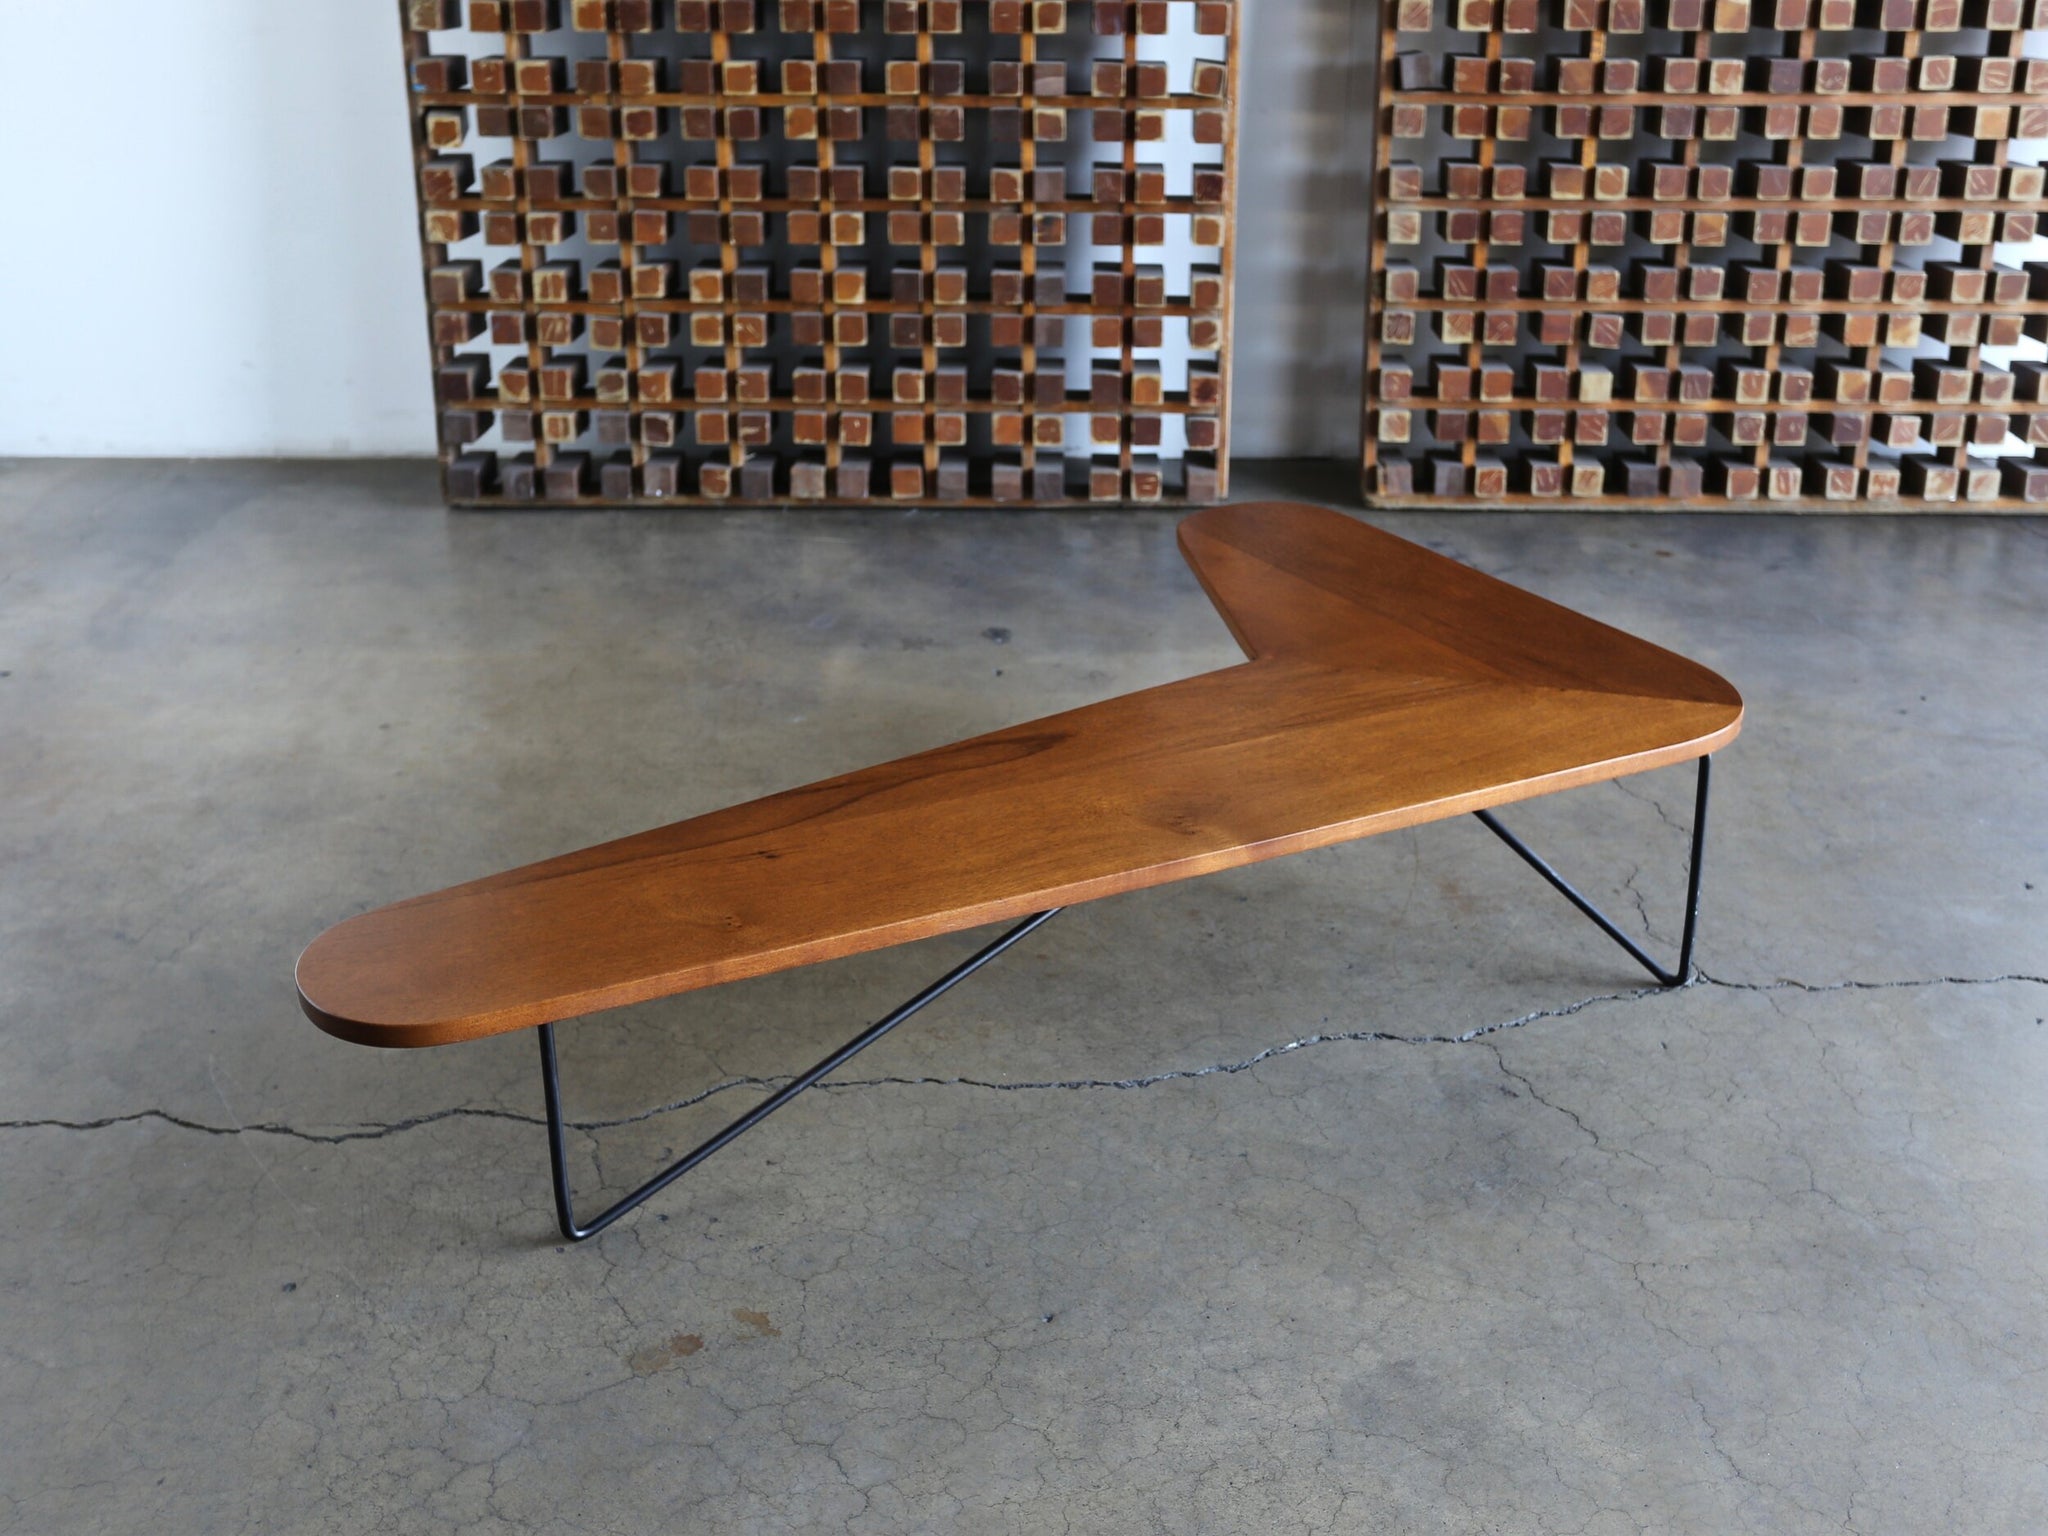 = SOLD = Luther Conover Coffee Table circa 1955